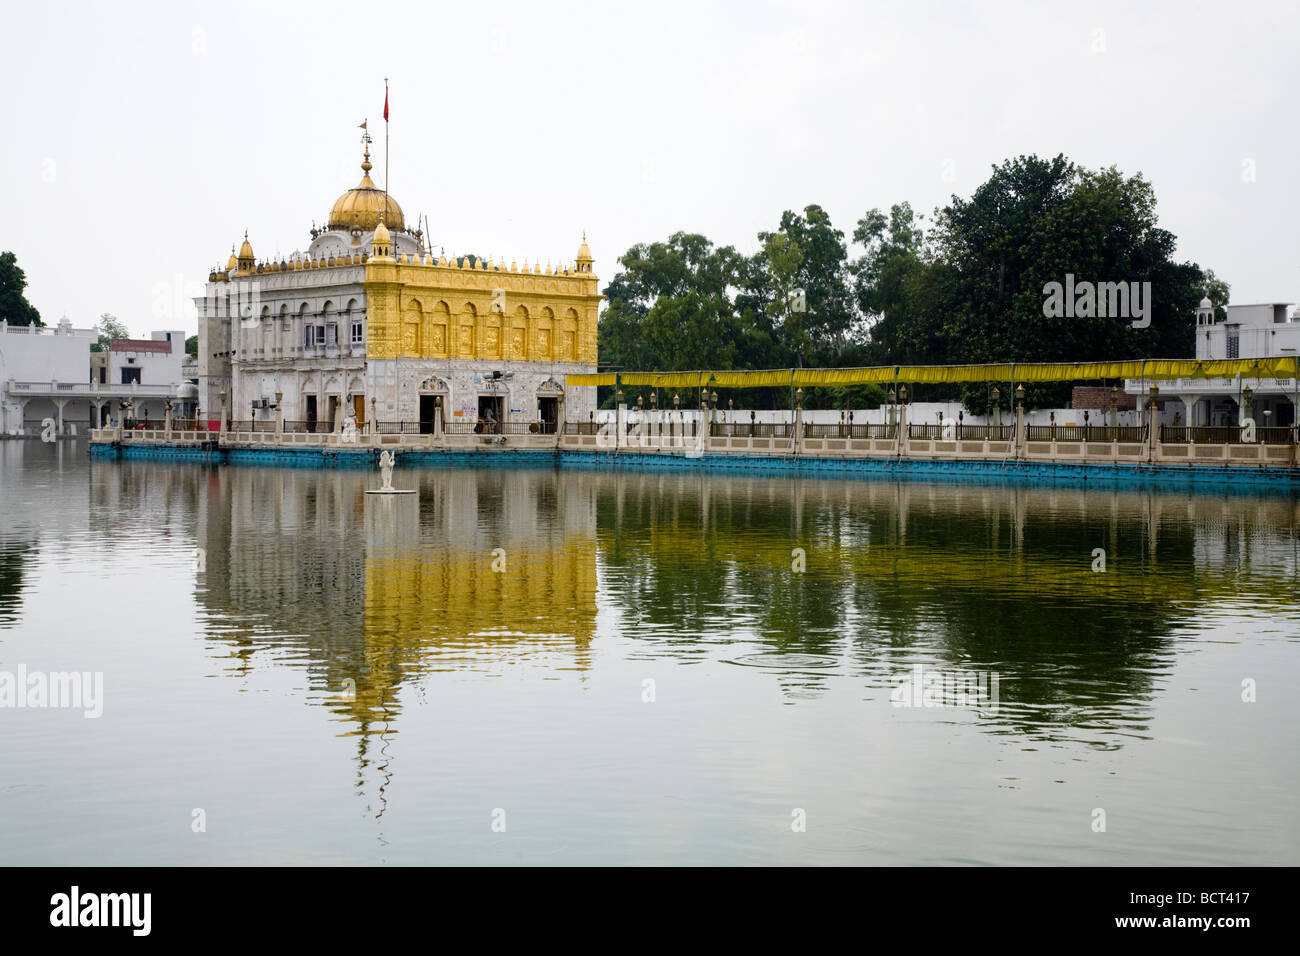 Sri Durgiana Hindu Temple, built in the style of the Sikh's Golden Temple, with a water tank and domed shrine. Amritsar. India Stock Photo